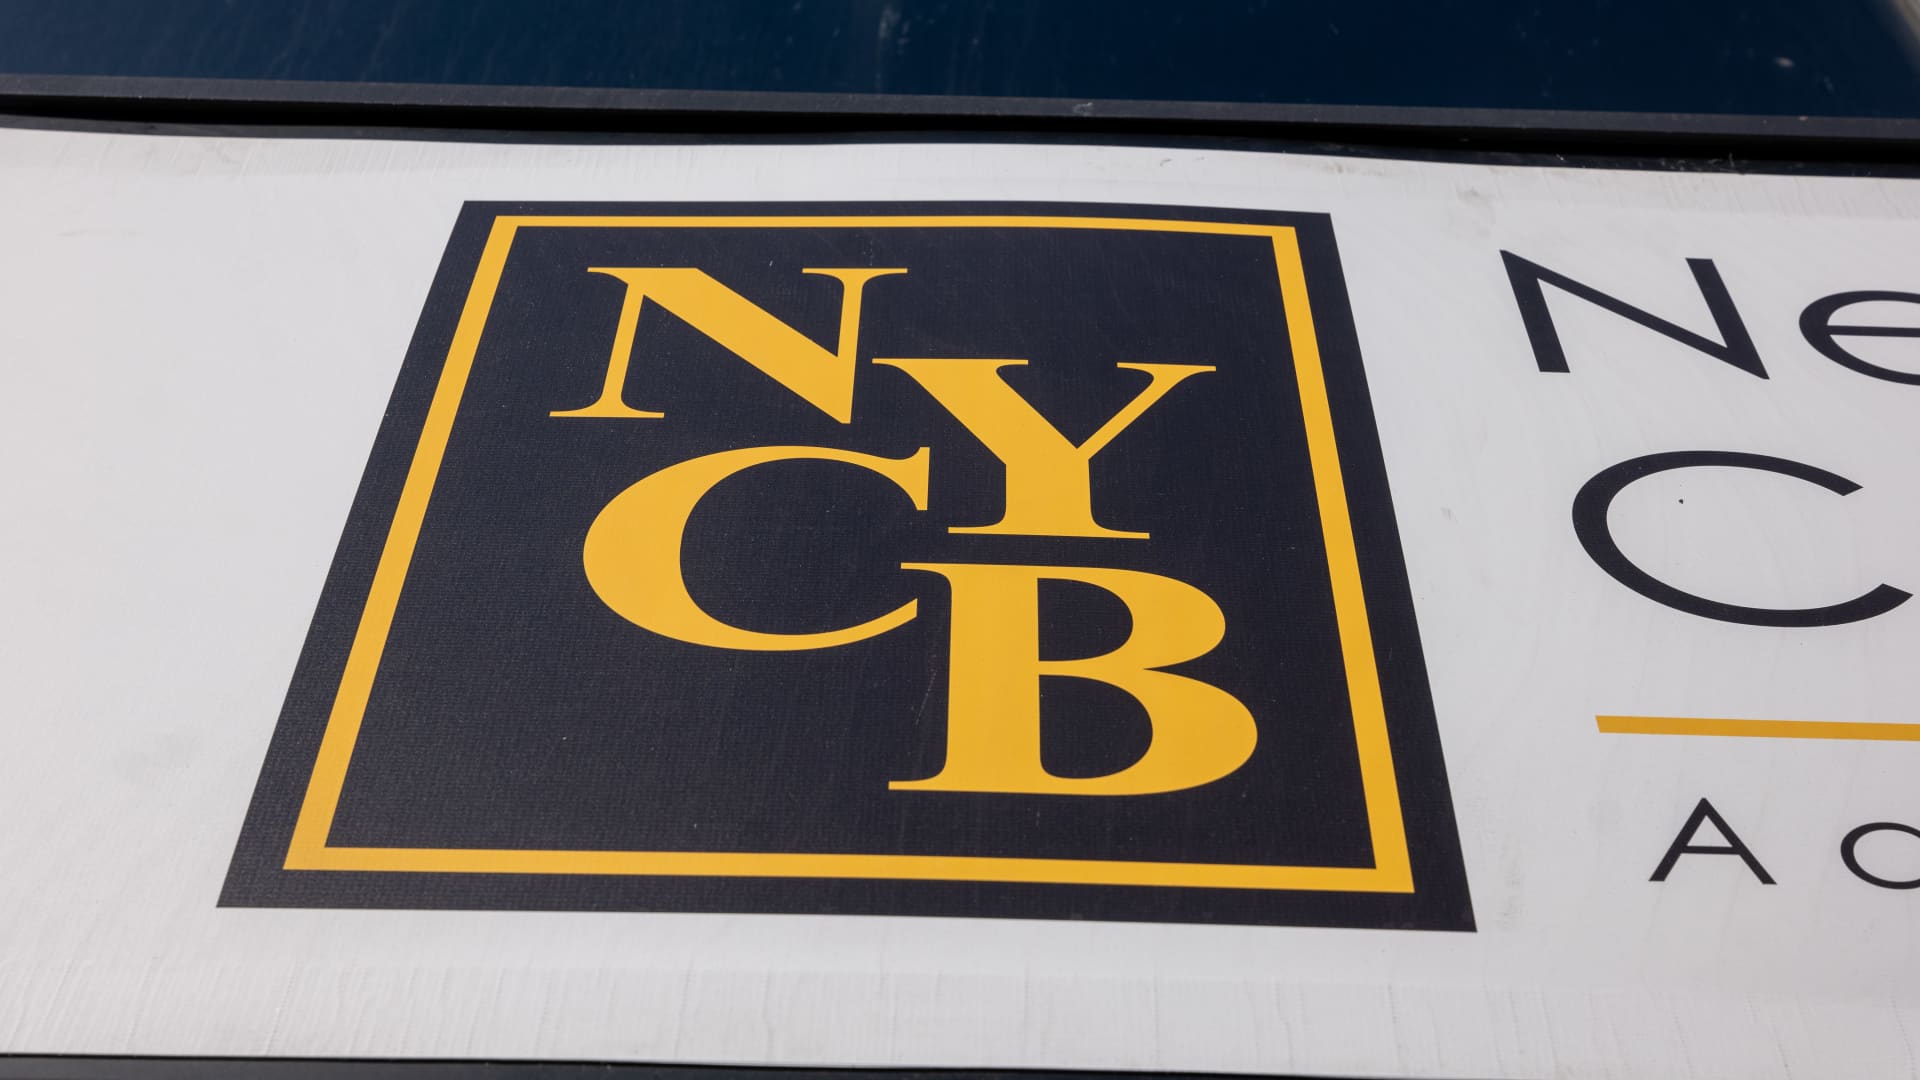 NYCB shares jump after new CEO gives two-year plan for 'clear path to profitability'